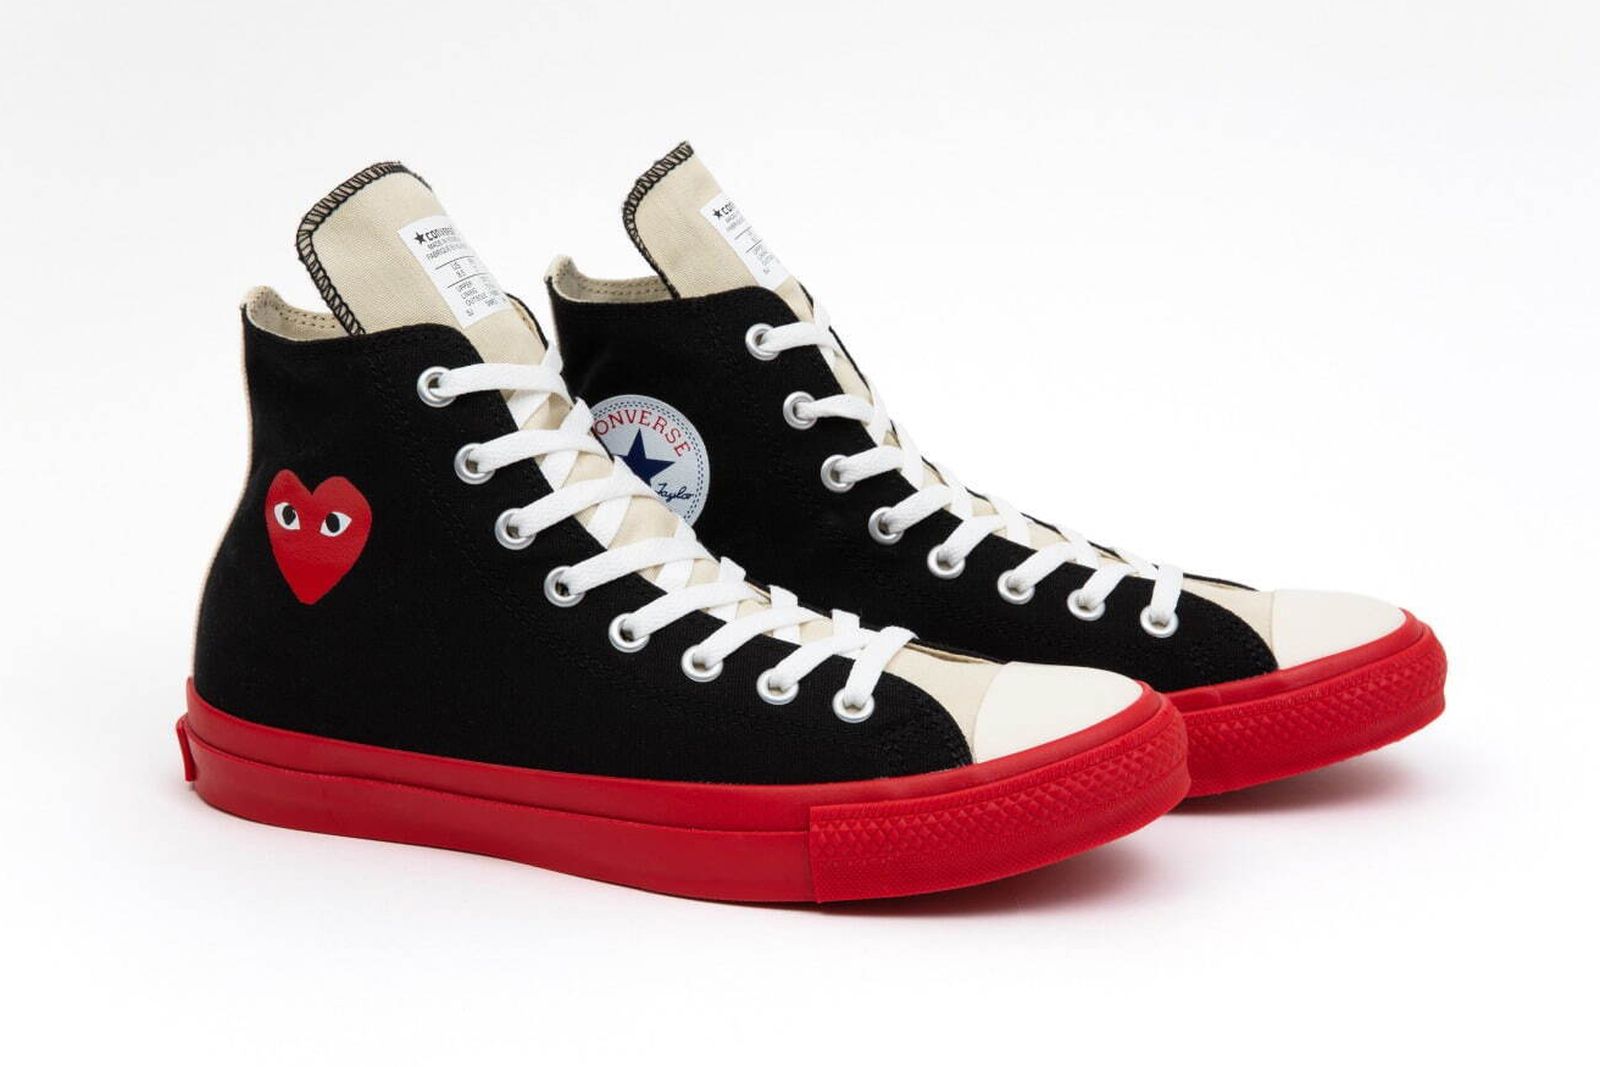 waitress Couscous Classify CdG Play & Converse Drop New Collab Sneakers: Price, Release Date